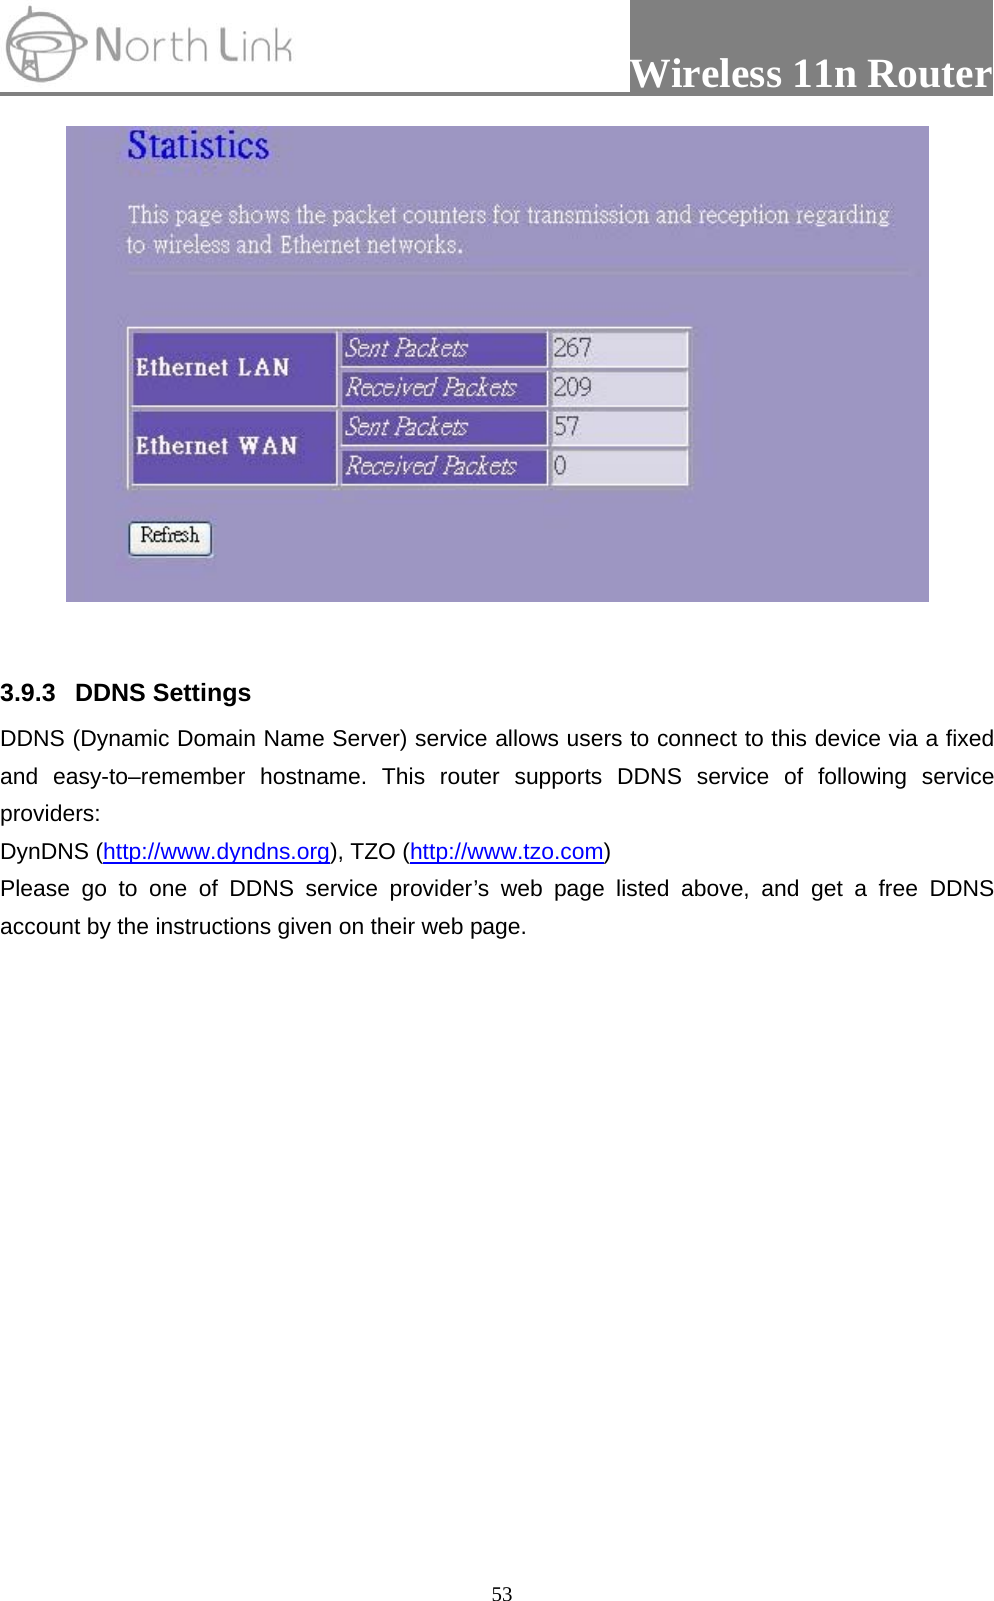                 Wireless 11n Router   53  3.9.3 DDNS Settings  DDNS (Dynamic Domain Name Server) service allows users to connect to this device via a fixed and easy-to–remember hostname. This router supports DDNS service of following service providers: DynDNS (http://www.dyndns.org), TZO (http://www.tzo.com) Please go to one of DDNS service provider’s web page listed above, and get a free DDNS account by the instructions given on their web page. 